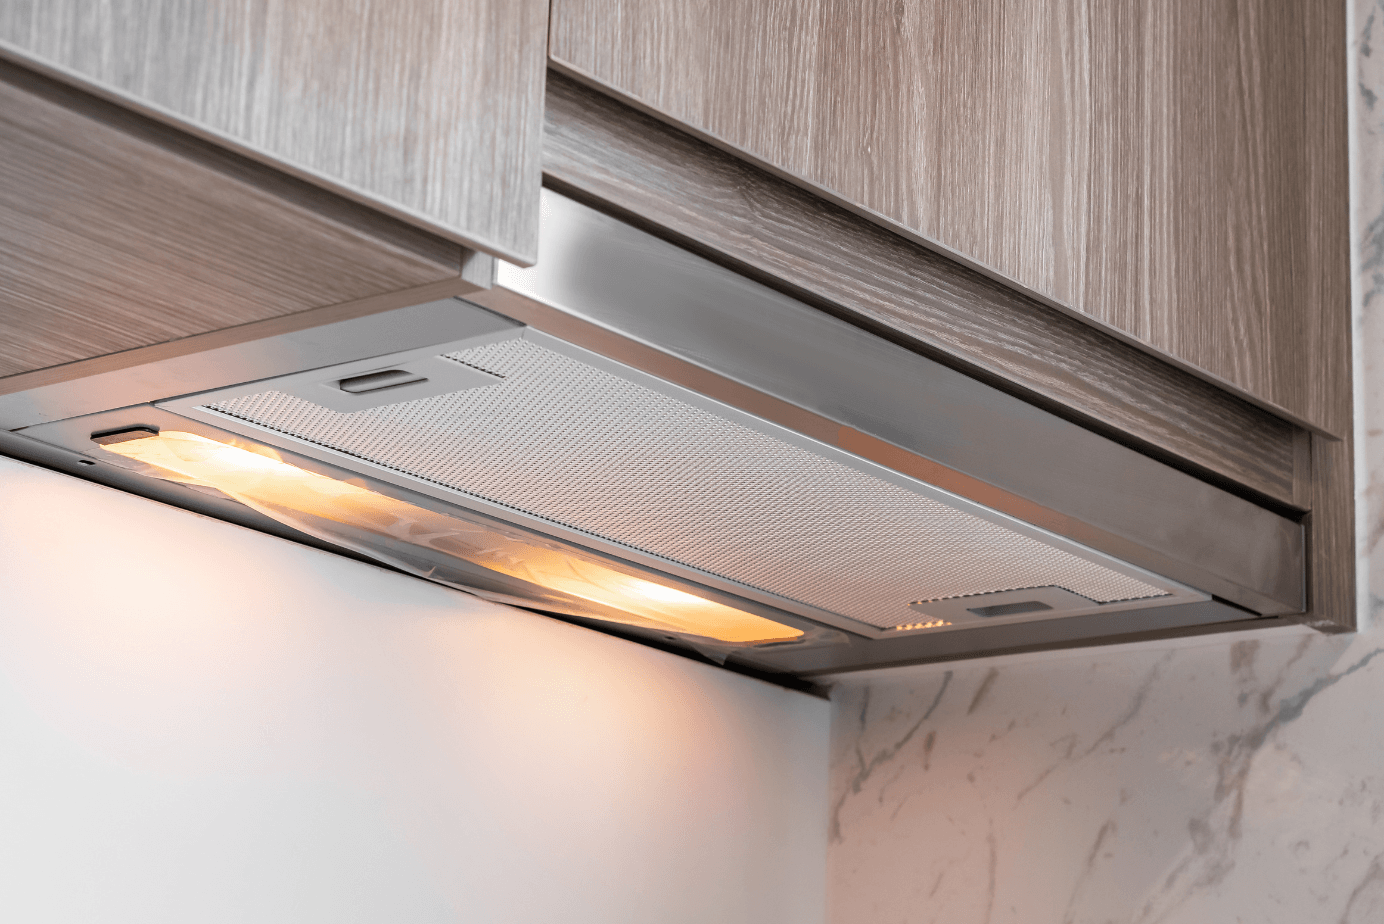 How To Choose The Perfect Under Cabinet Range Hood For Your Home